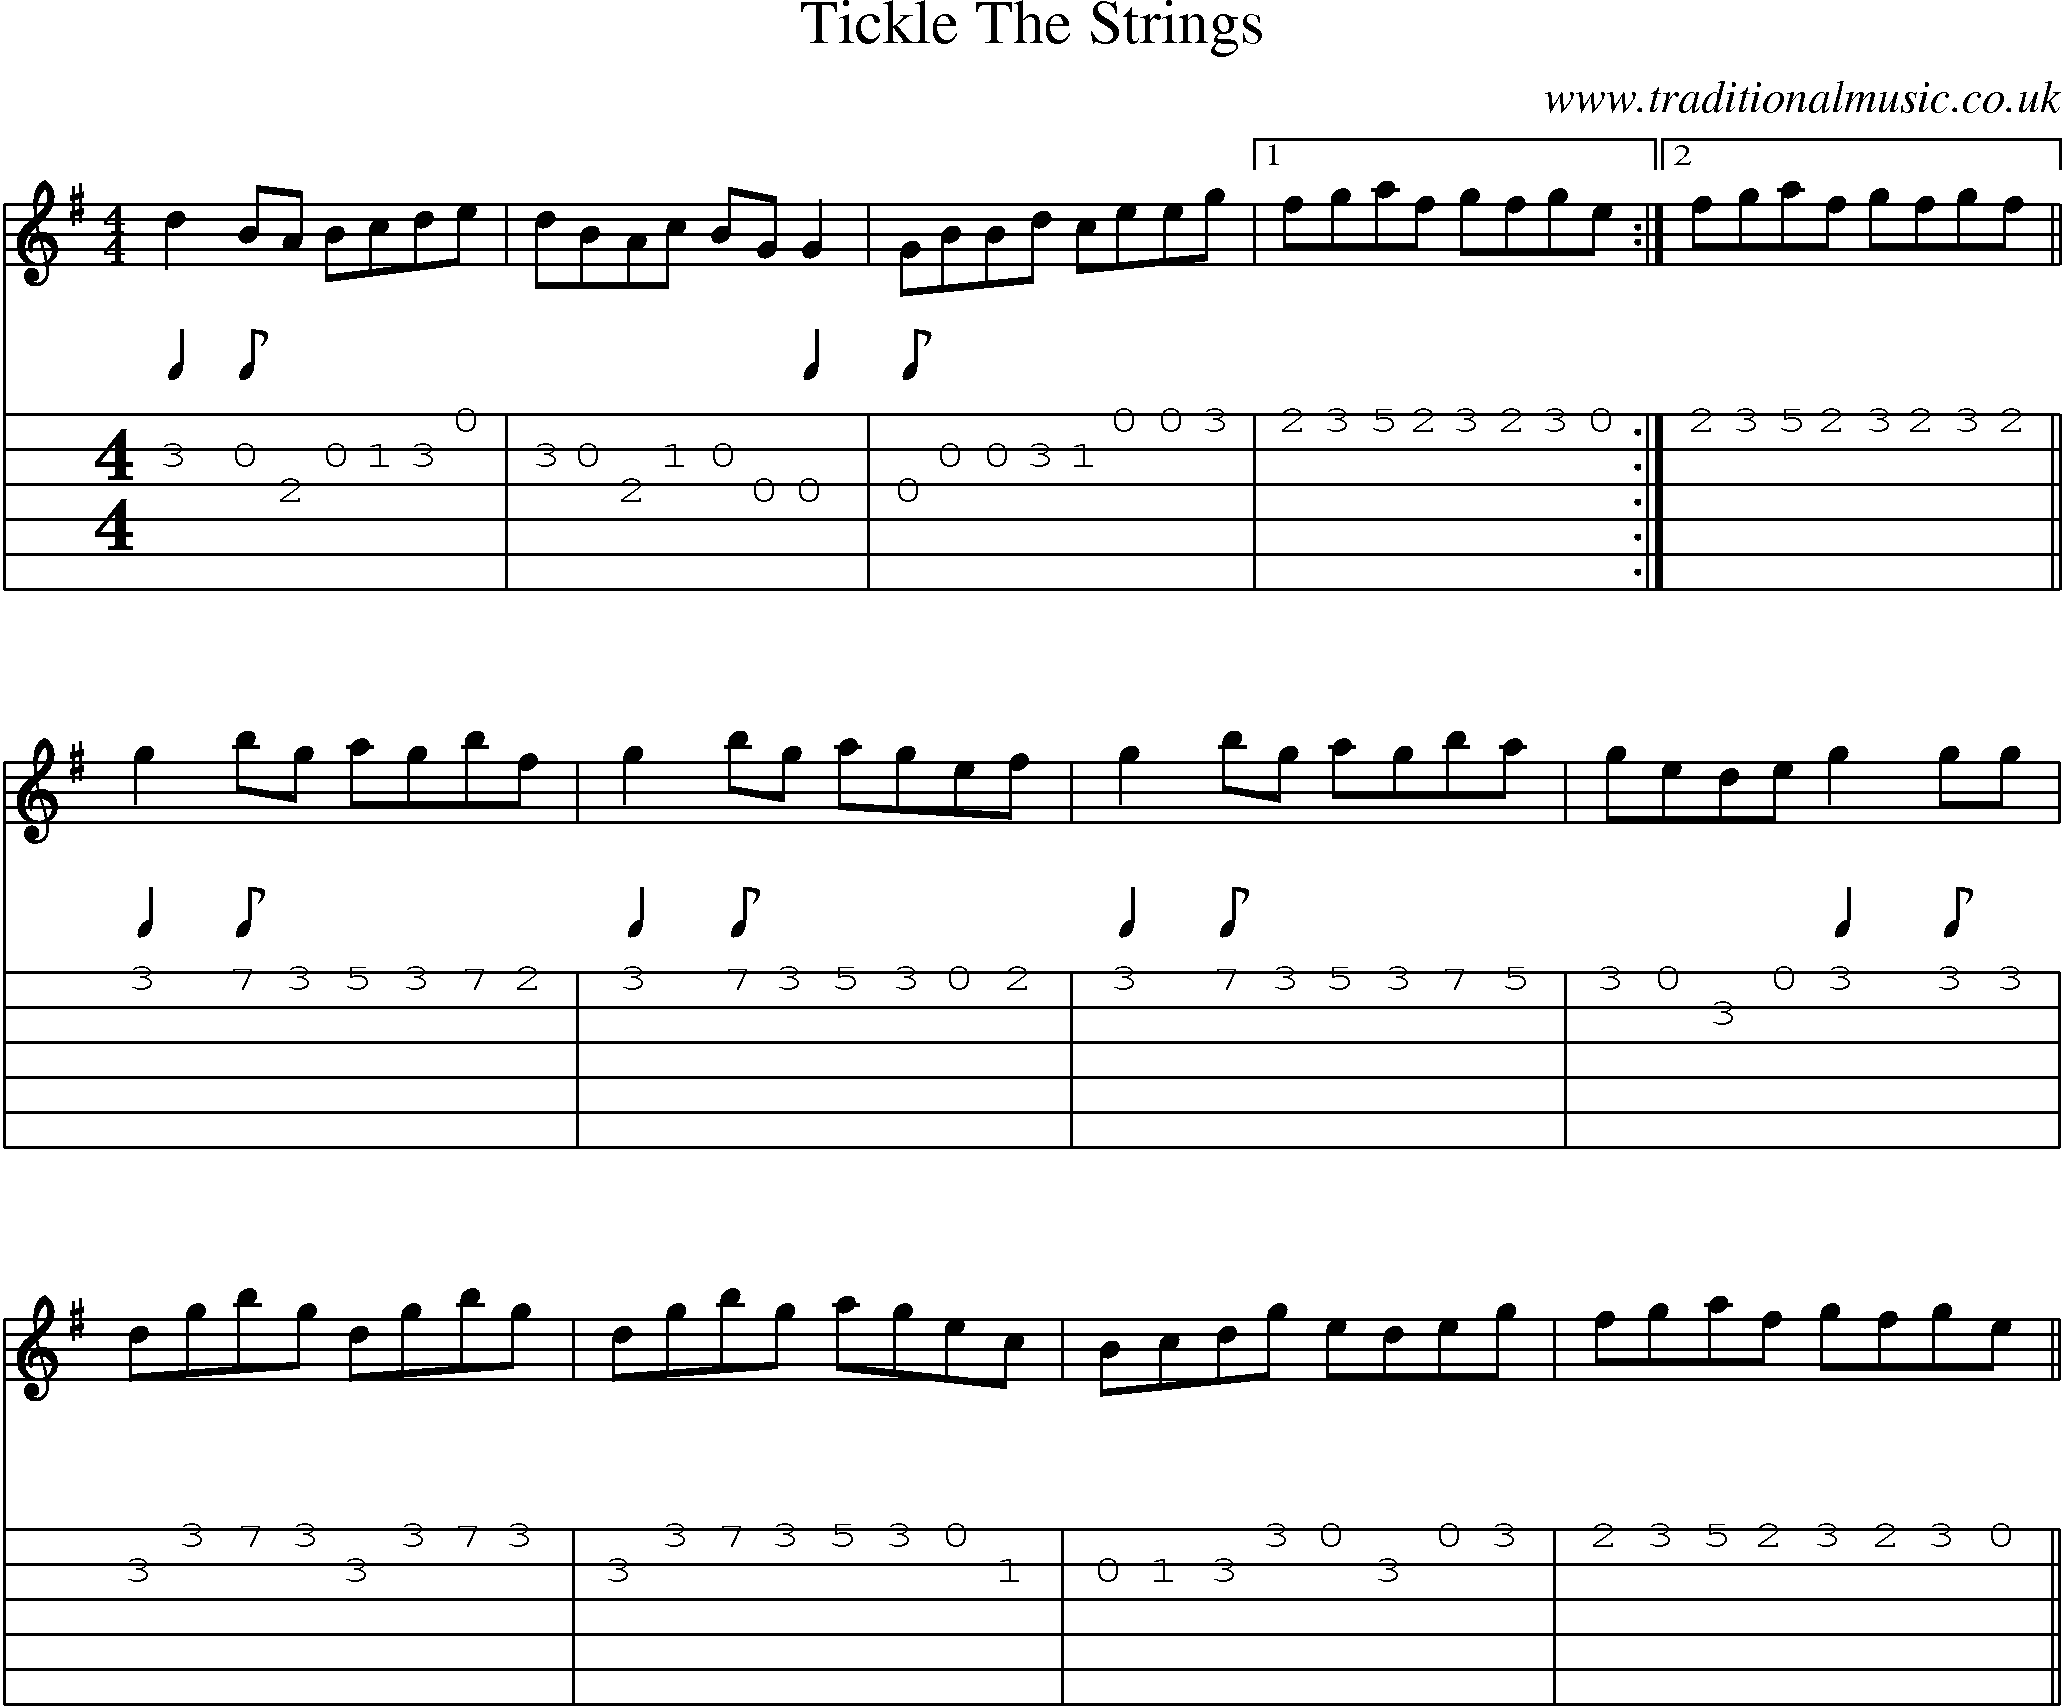 Music Score and Guitar Tabs for Tickle Strings